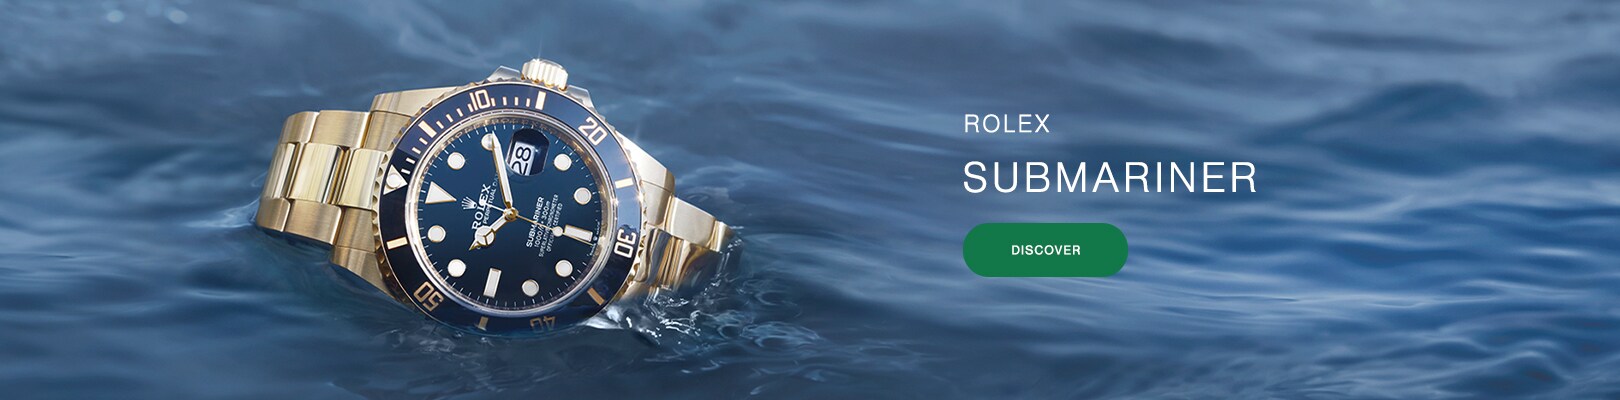 Rolex watch shopping Dubai Airport - what can we find + Tudor +